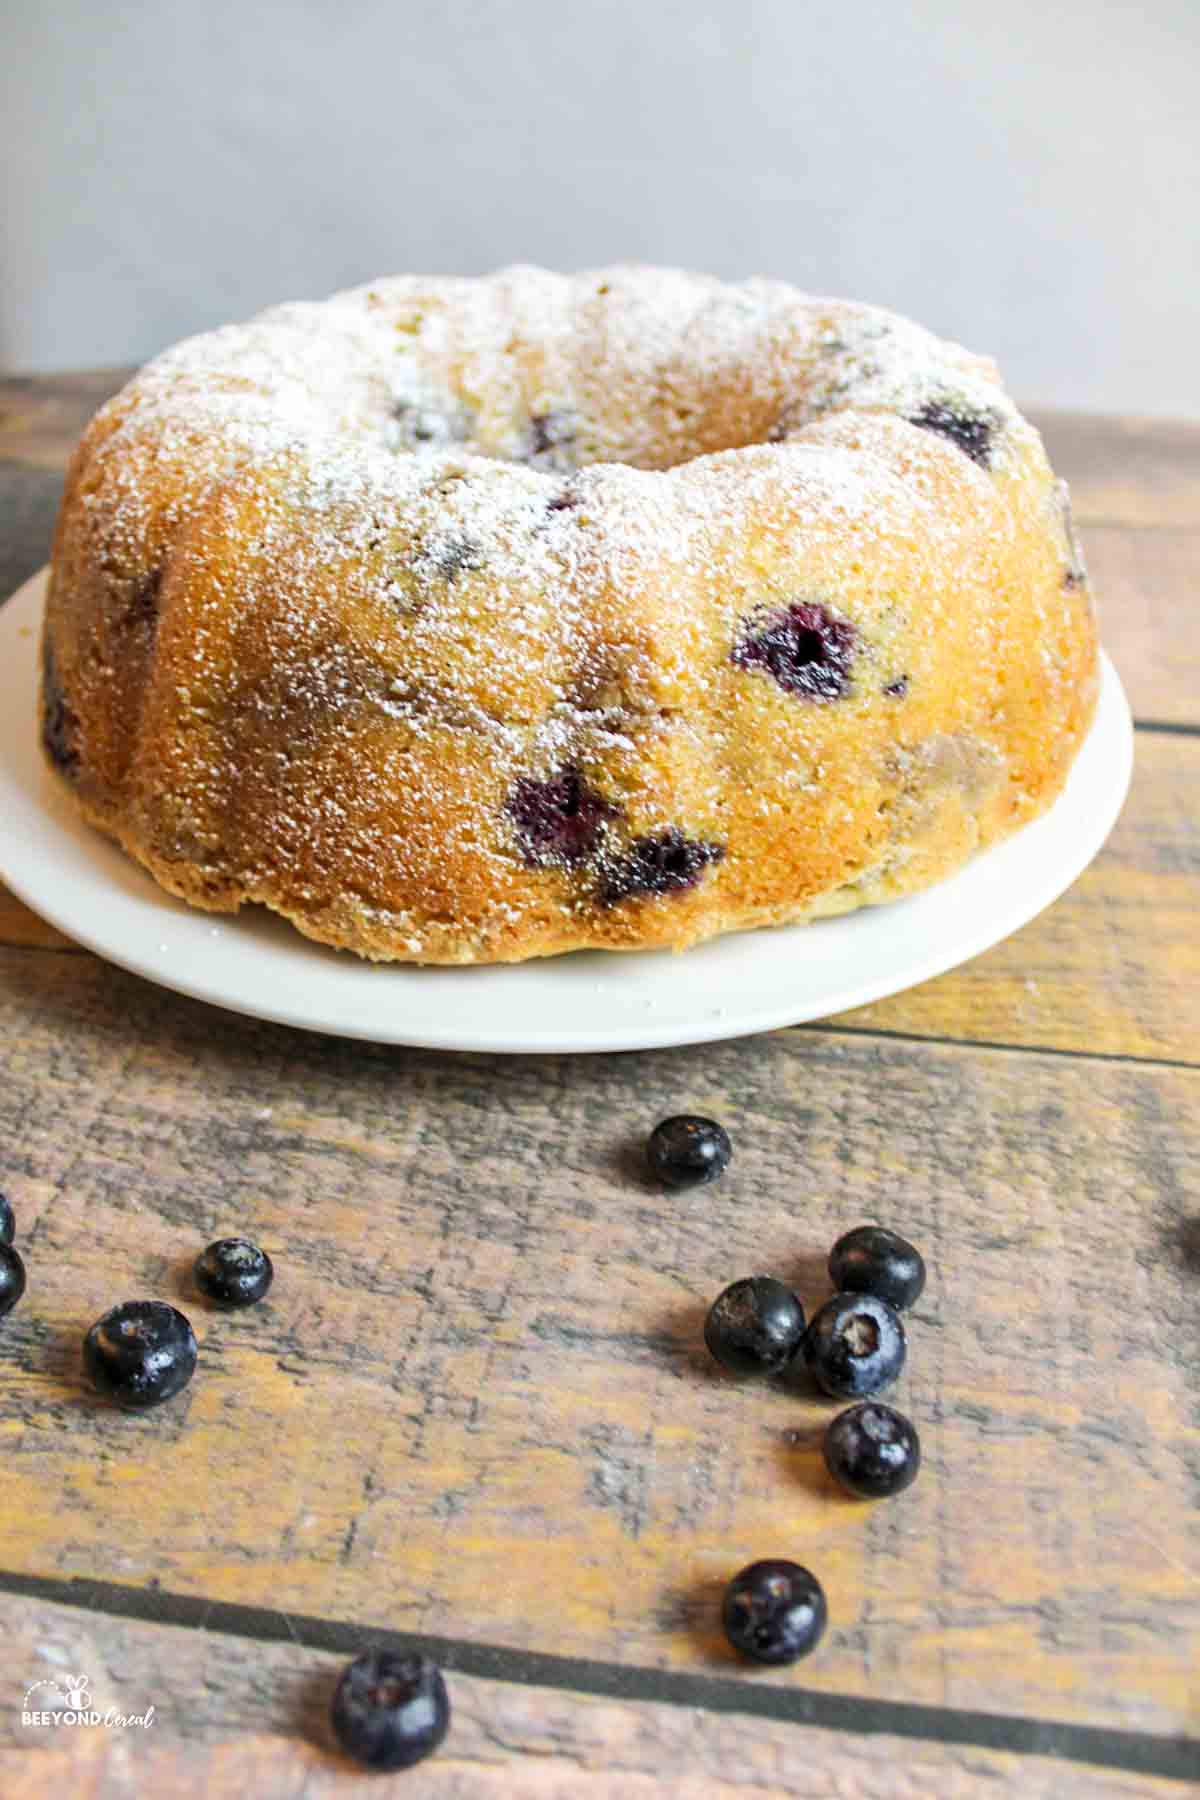 A full bundt cake with scattered blueberries in front